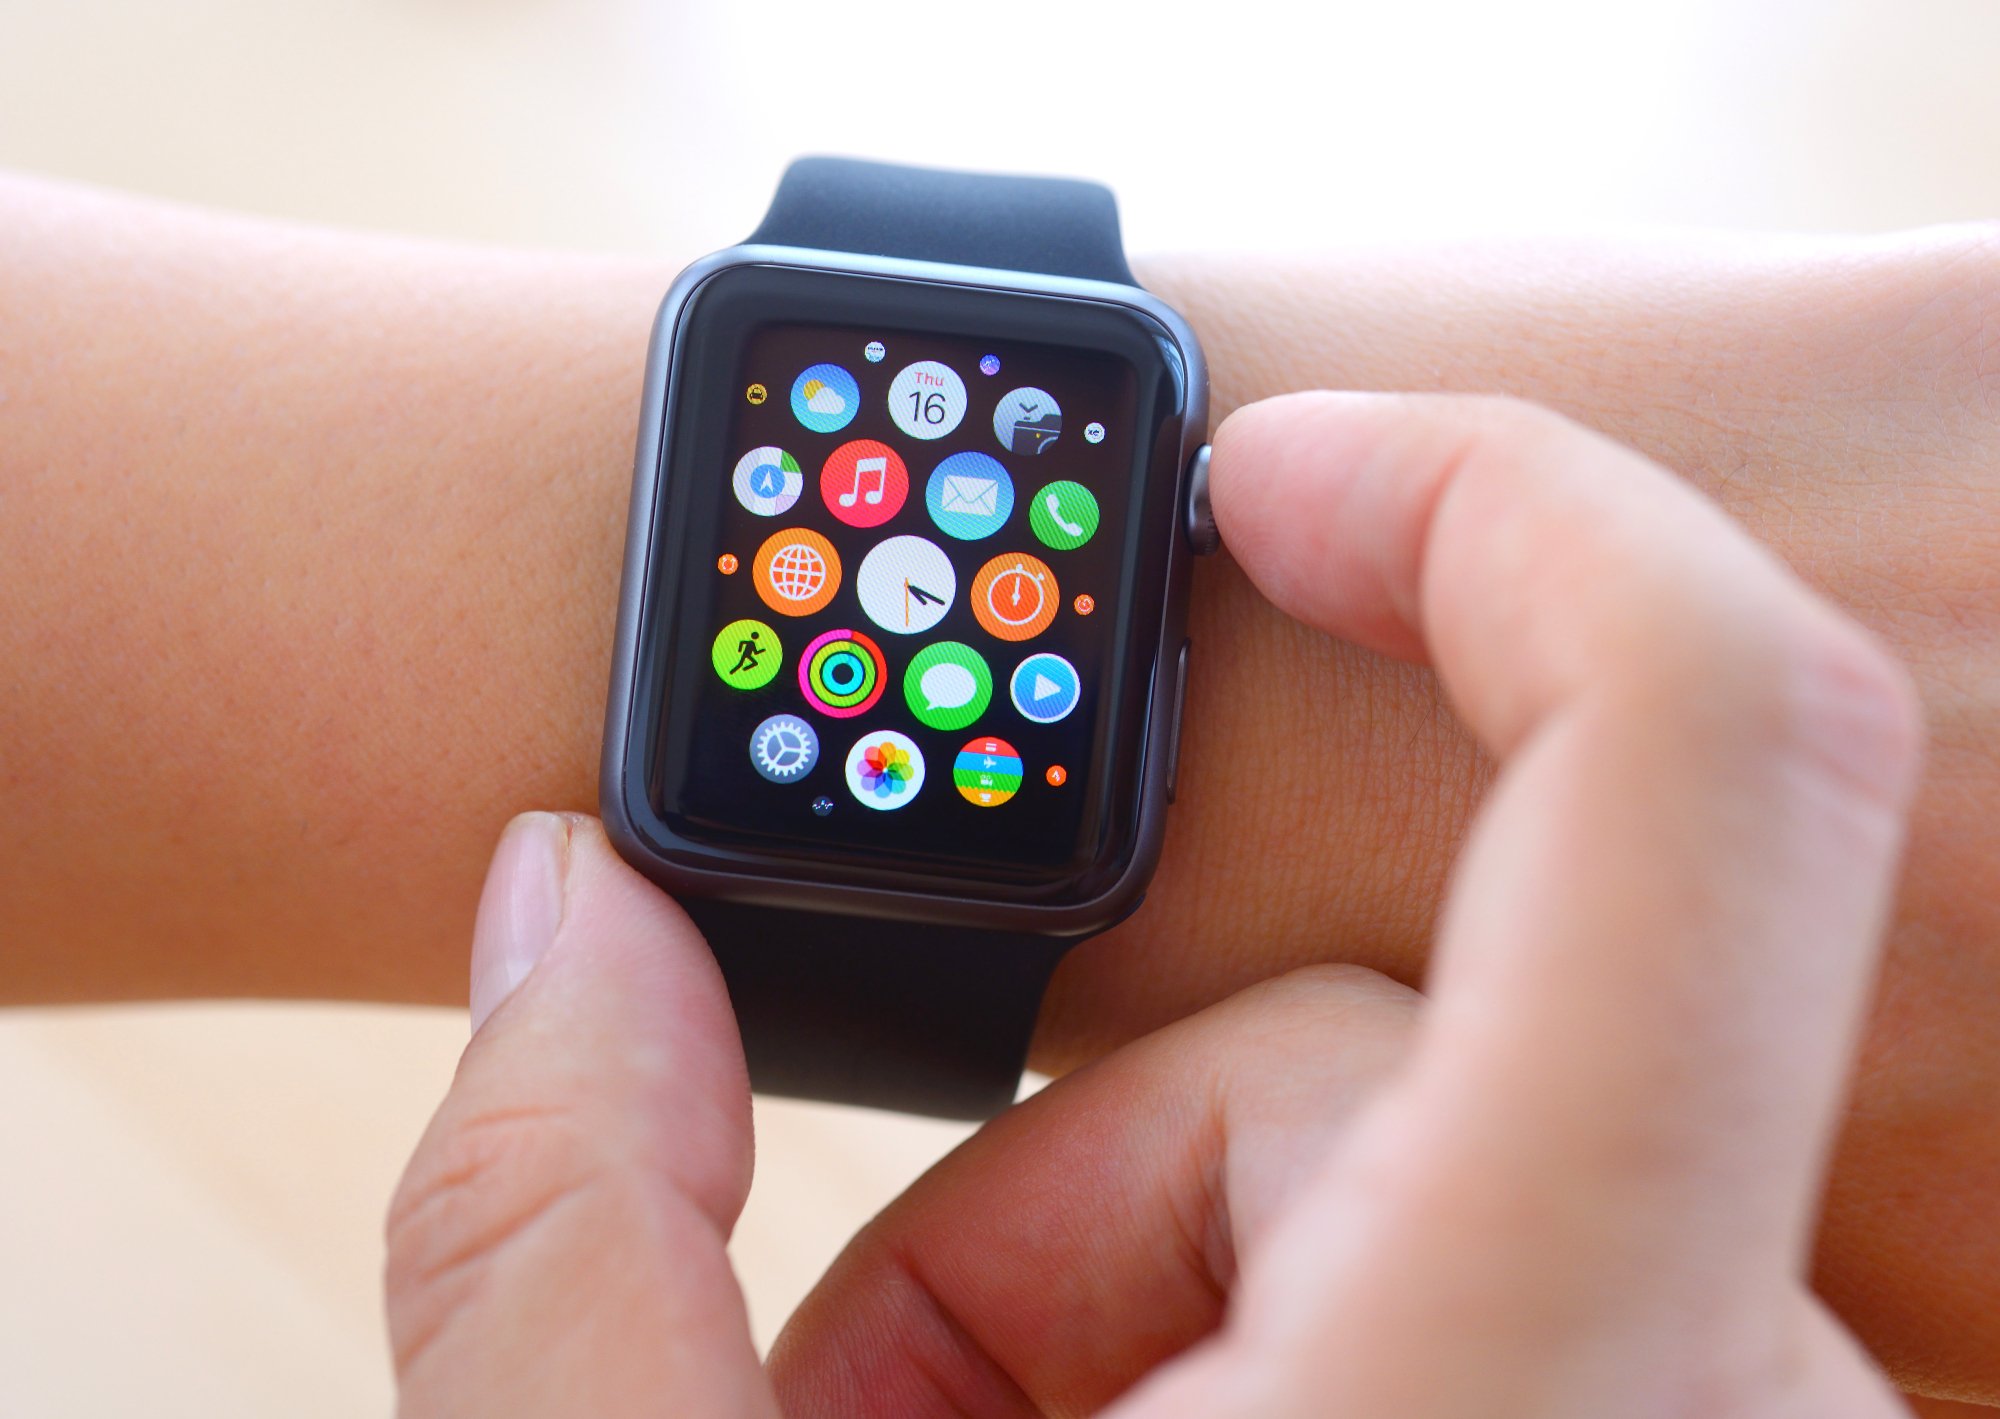 Remove the Apple Watch from your wrist